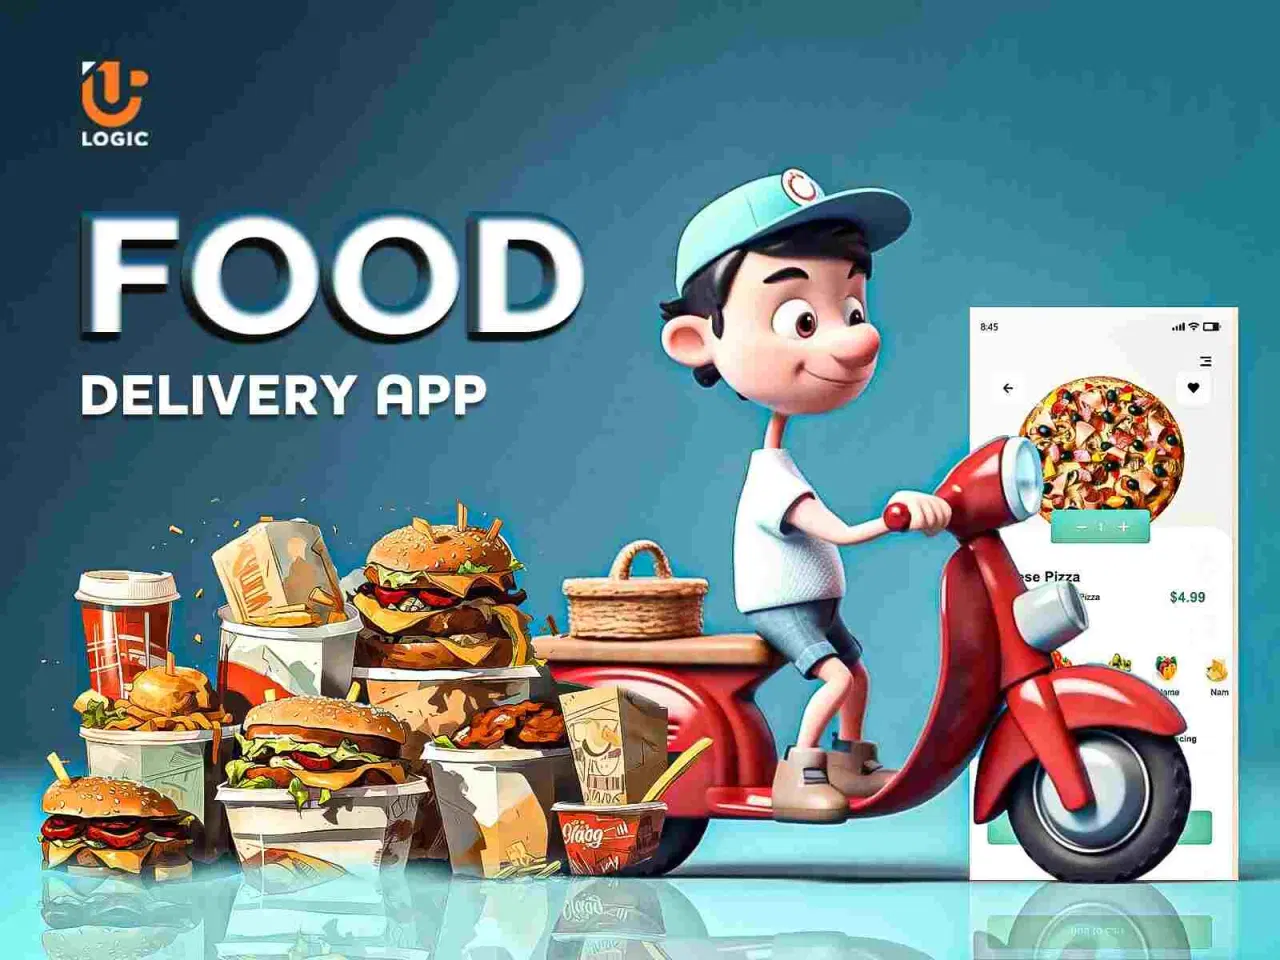 Billede 3 - Looking to take your food delivery business to the